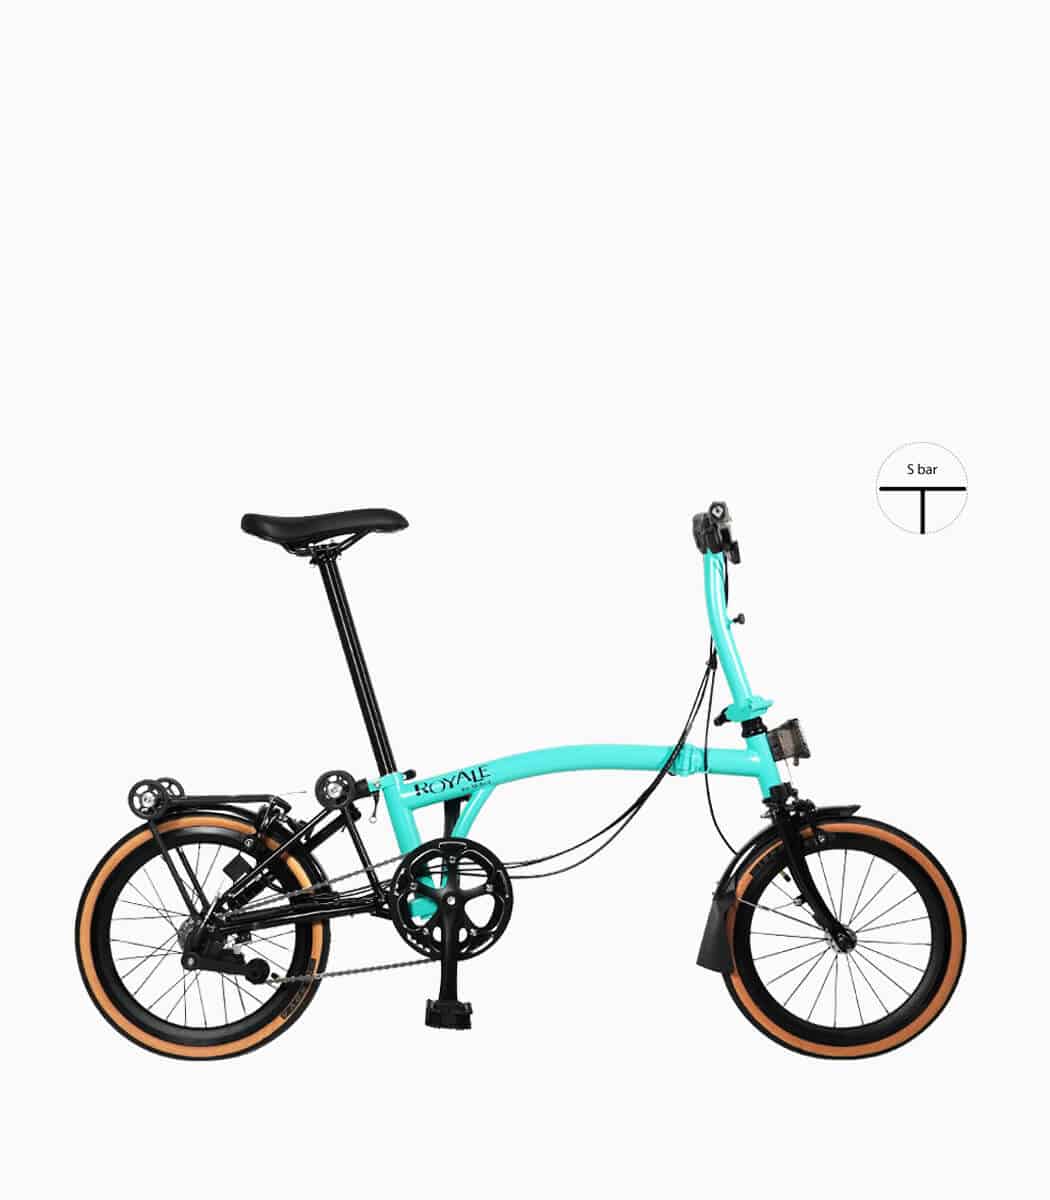 MOBOT ROYALE S6 (TIFFANY BLUE) foldable bicycle S-bar with tanwall tyres high profile rim right